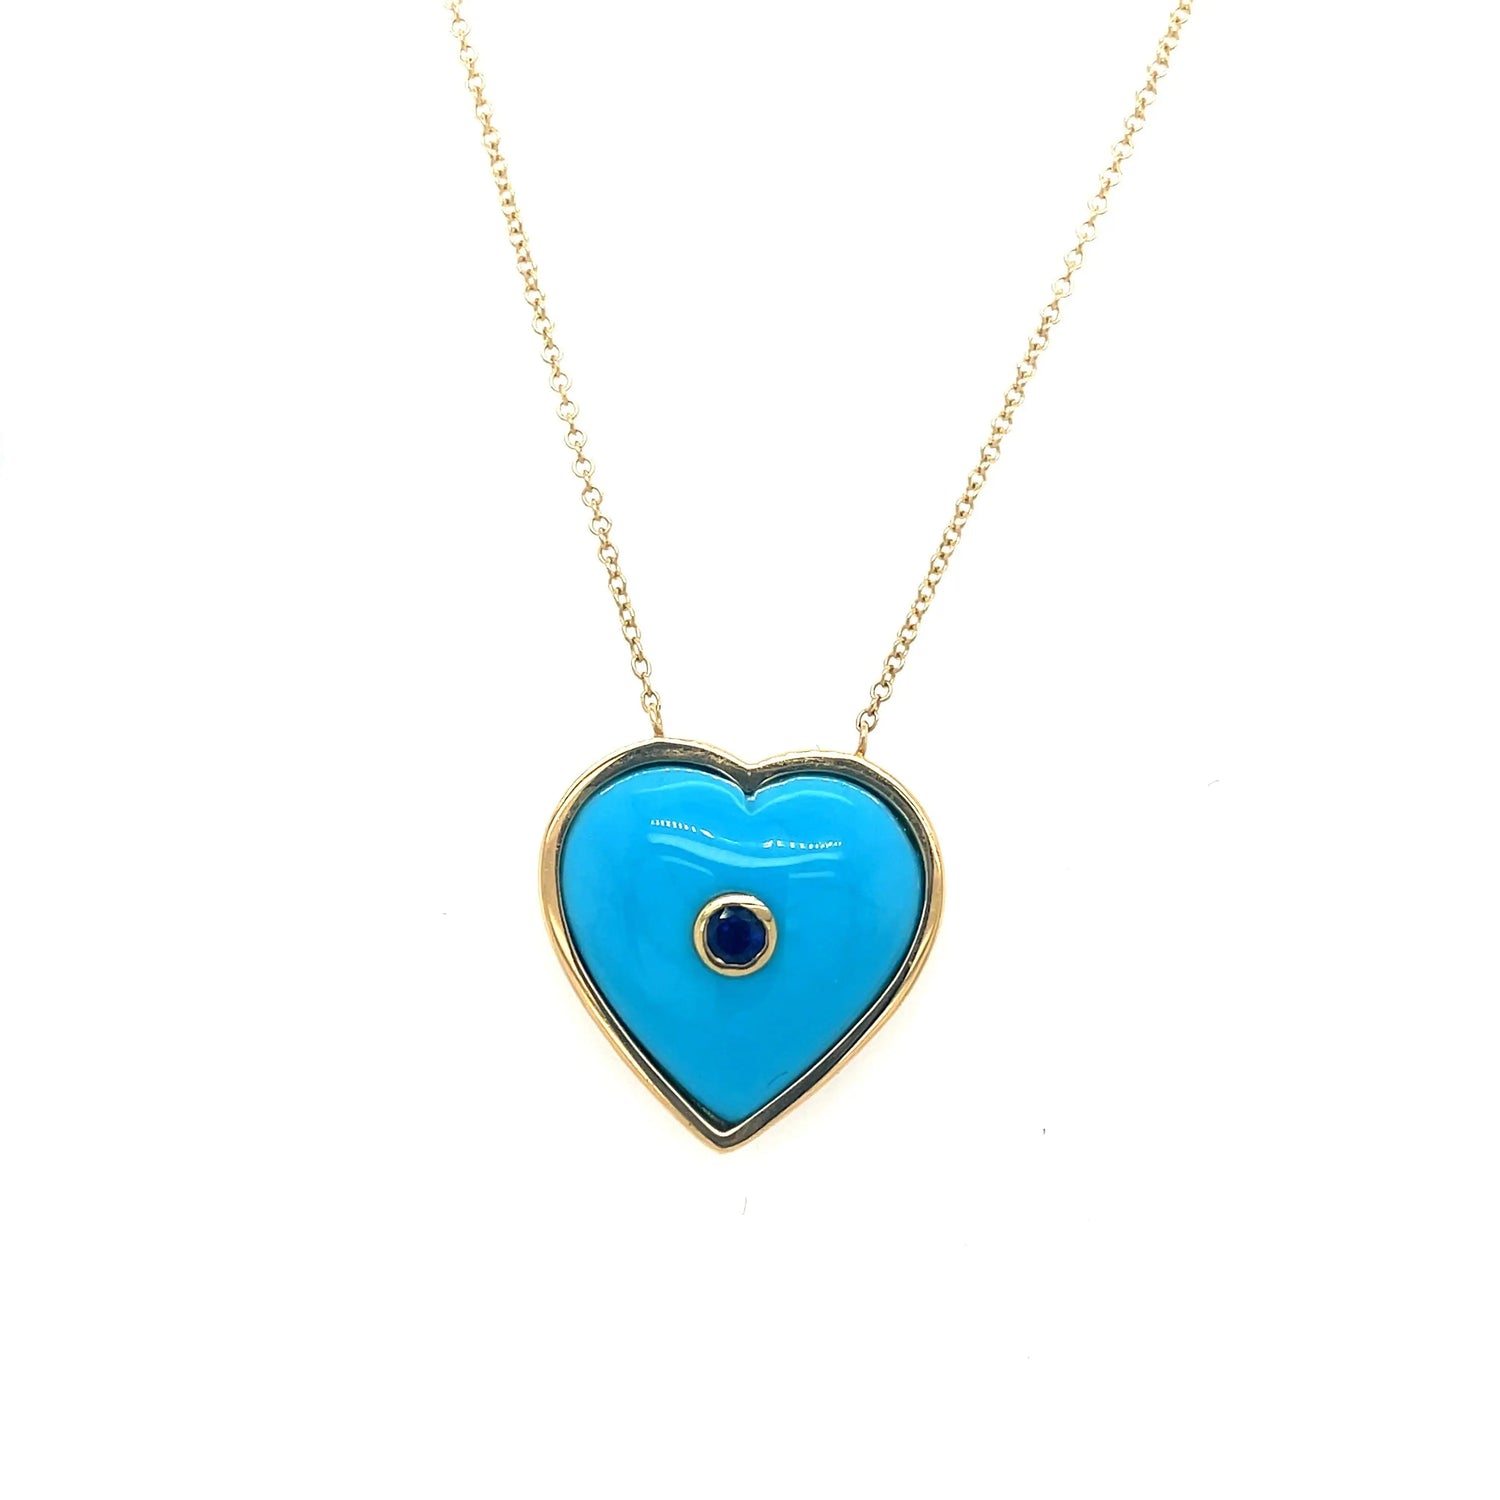 A played nod to the latest trend, hearts. Brent Neale created this puff birthstone heart pendant with blue sapphires. This piece is set in 18k yellow gold and is on an 18 inch chain.   Designed by Brent Neale and made in New York